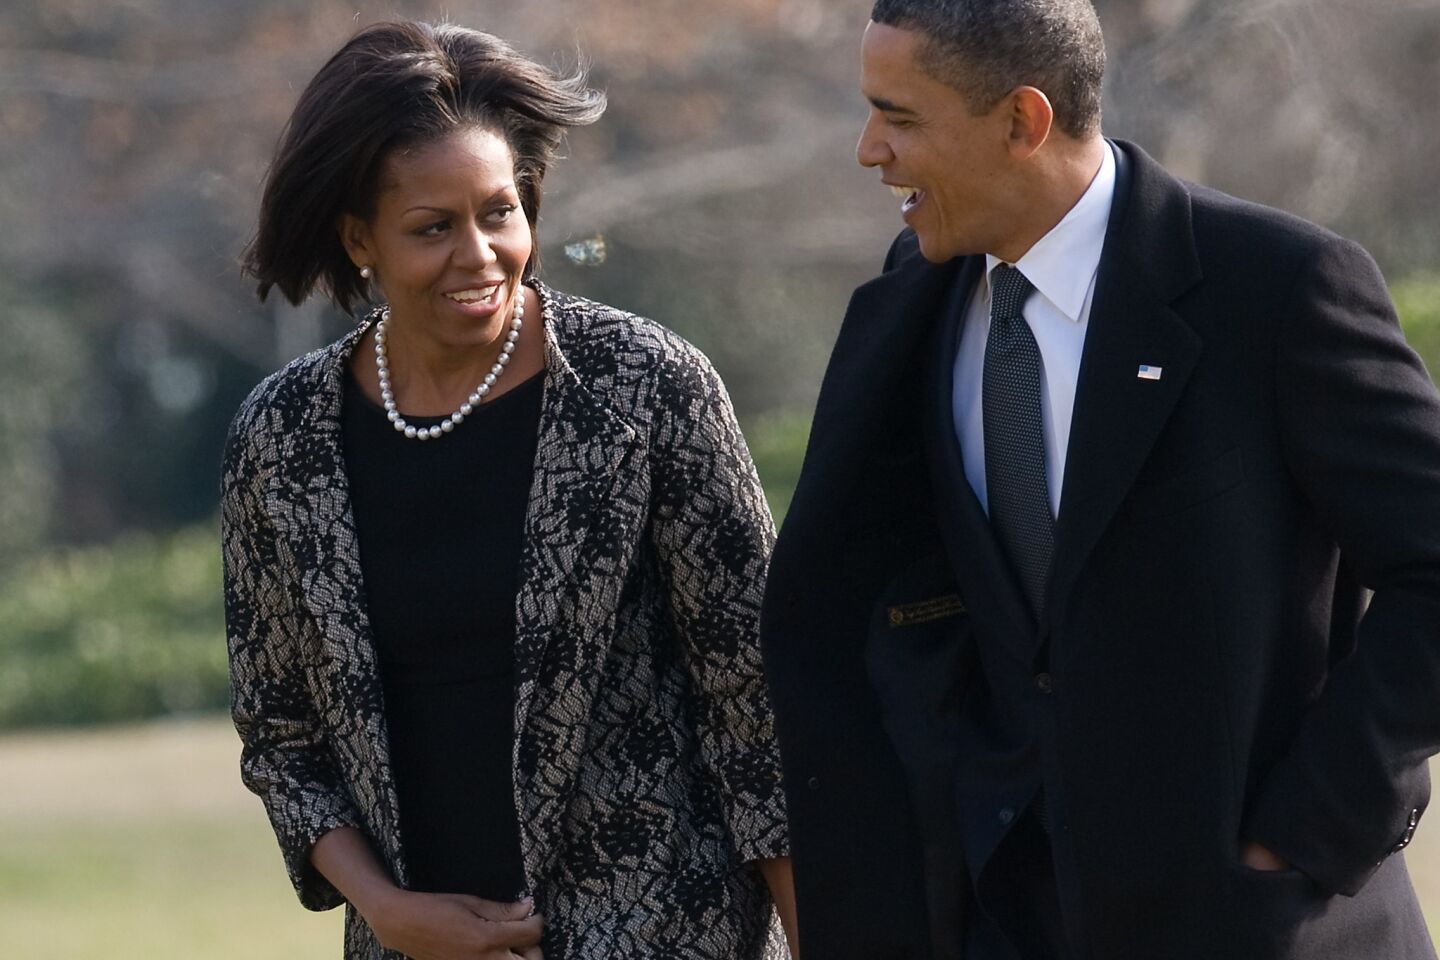 First Lady Michelle Obama, with President Obama, is dressed in traditional somber attire for the funeral of Vice President Joe Biden's mother in 2010, but she also shows off a new bobbed hairstyle.